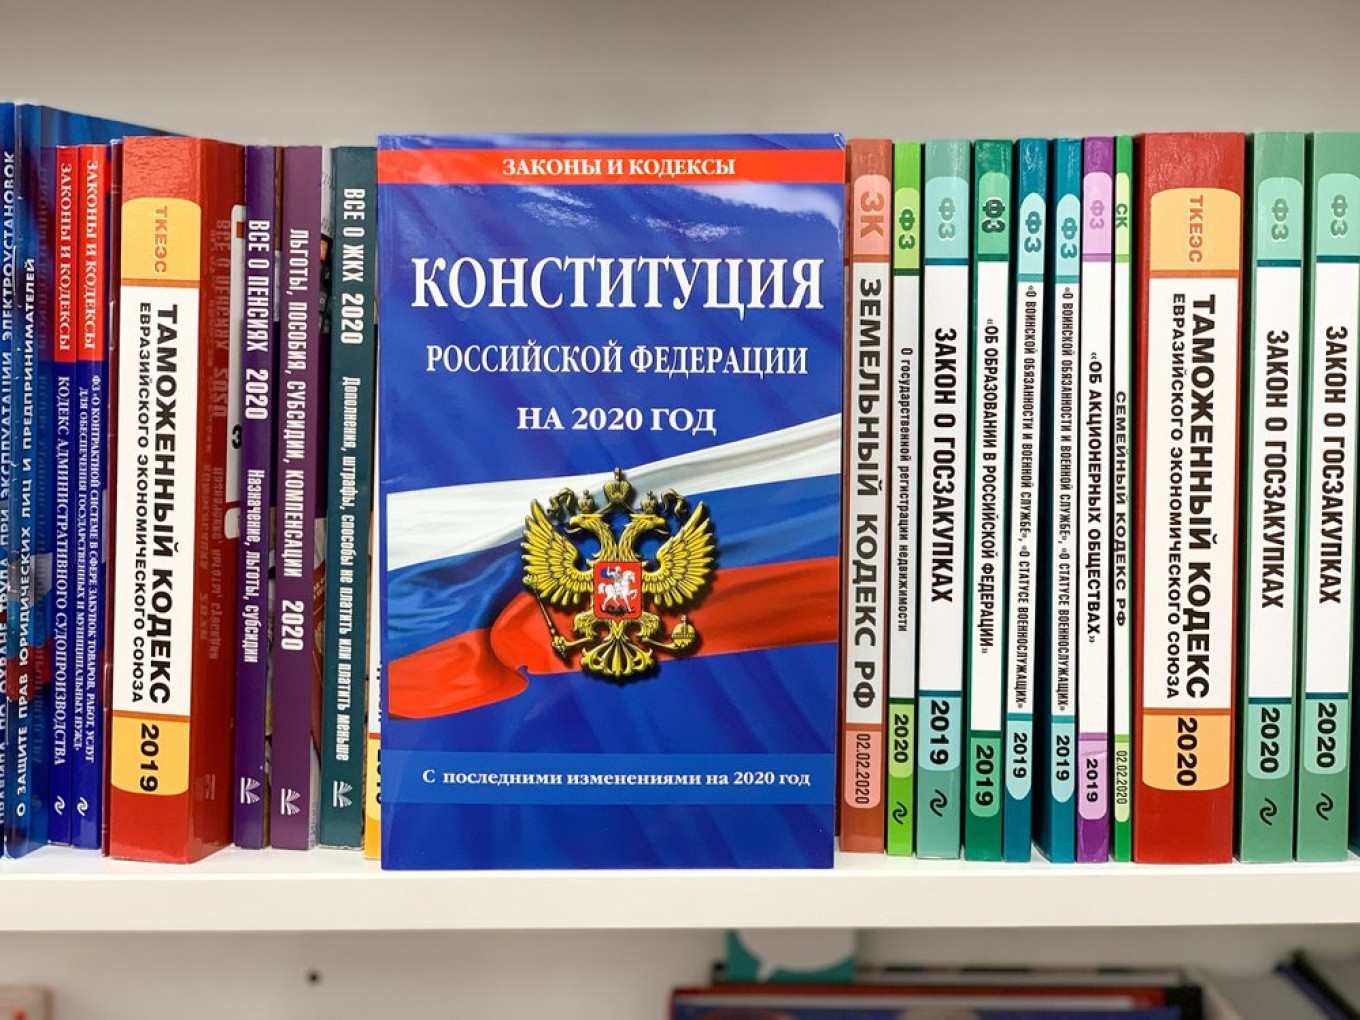 Russian Bookstores Sell New Constitution Ahead of Vote on Putin’s Reforms